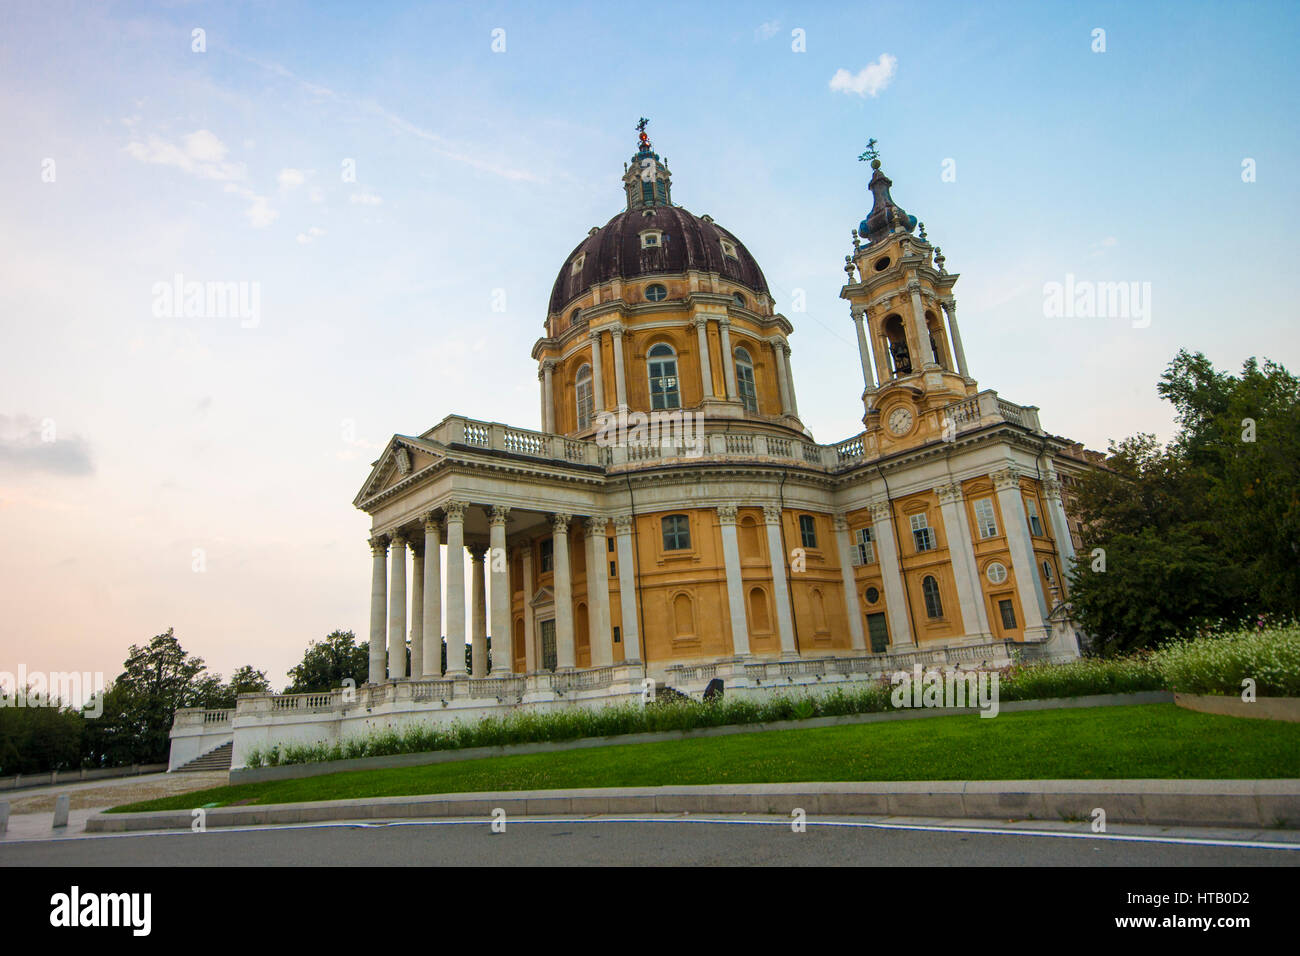 Basilica di Superga, a baroque church in the vicinity of Turin (Torino), Italy, and burial place of the Savoy family. Stock Photo